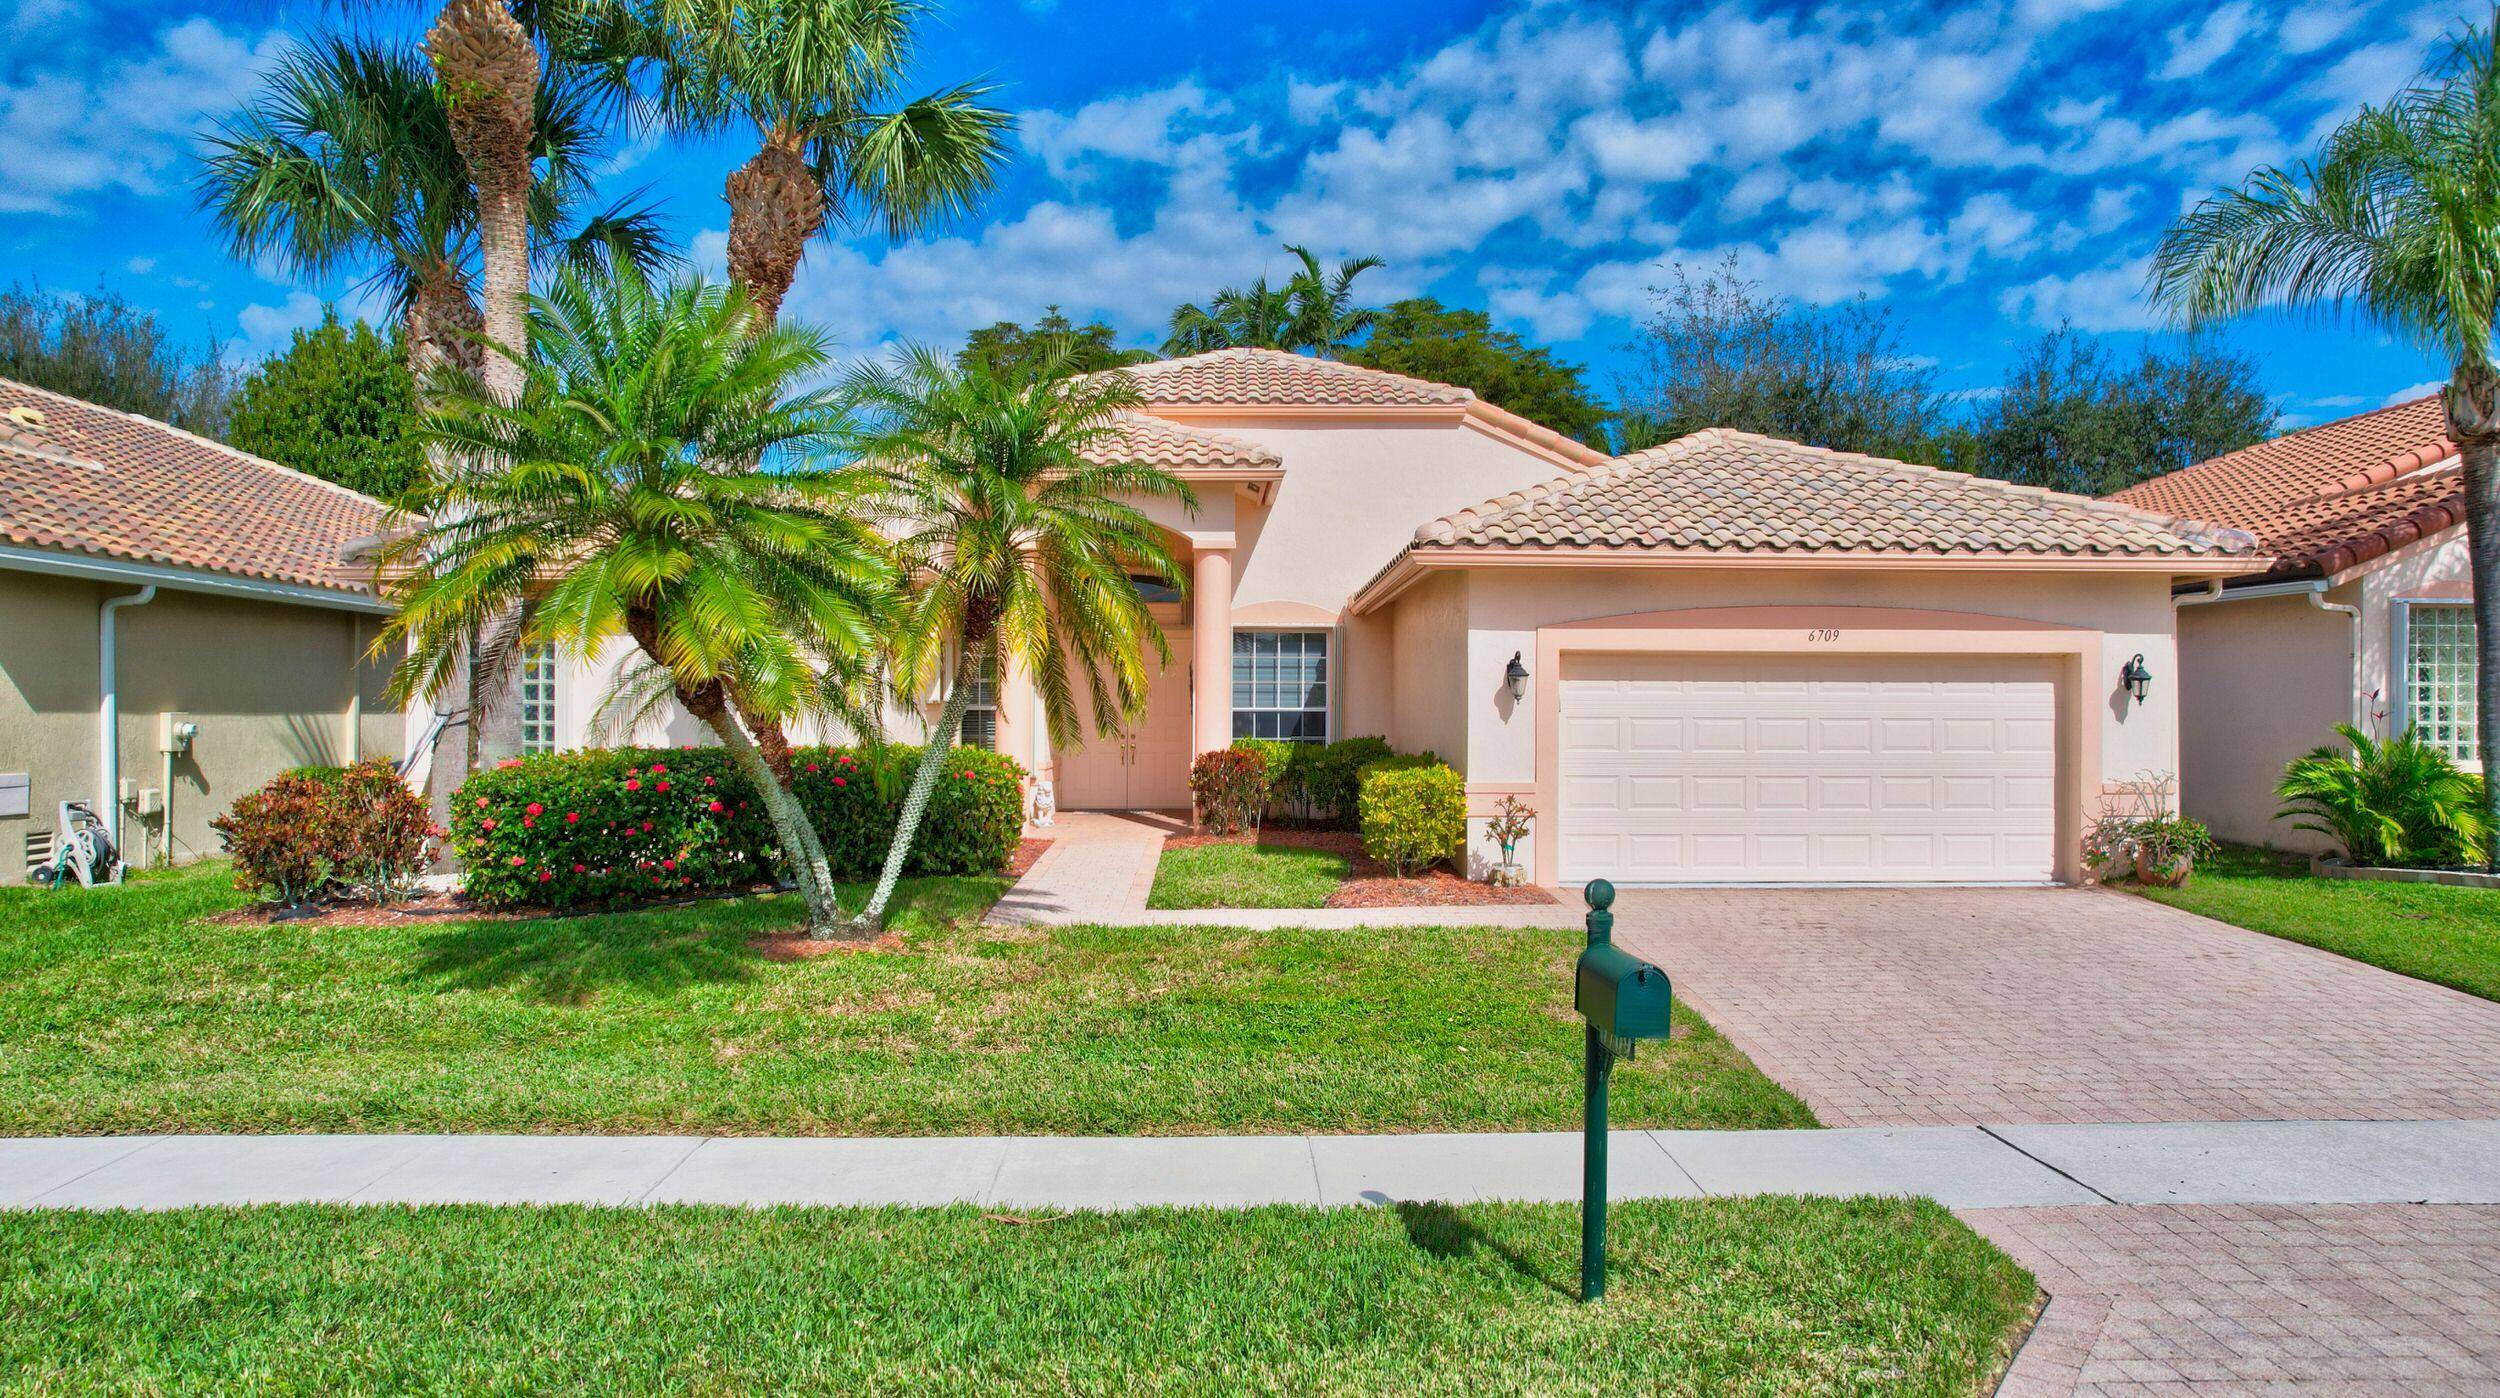 Welcome to this Beautiful 3 Bed 2 Bath home in the Gated, 55, Pet Friendly community of Ponte Vecchio in Boynton Beach.